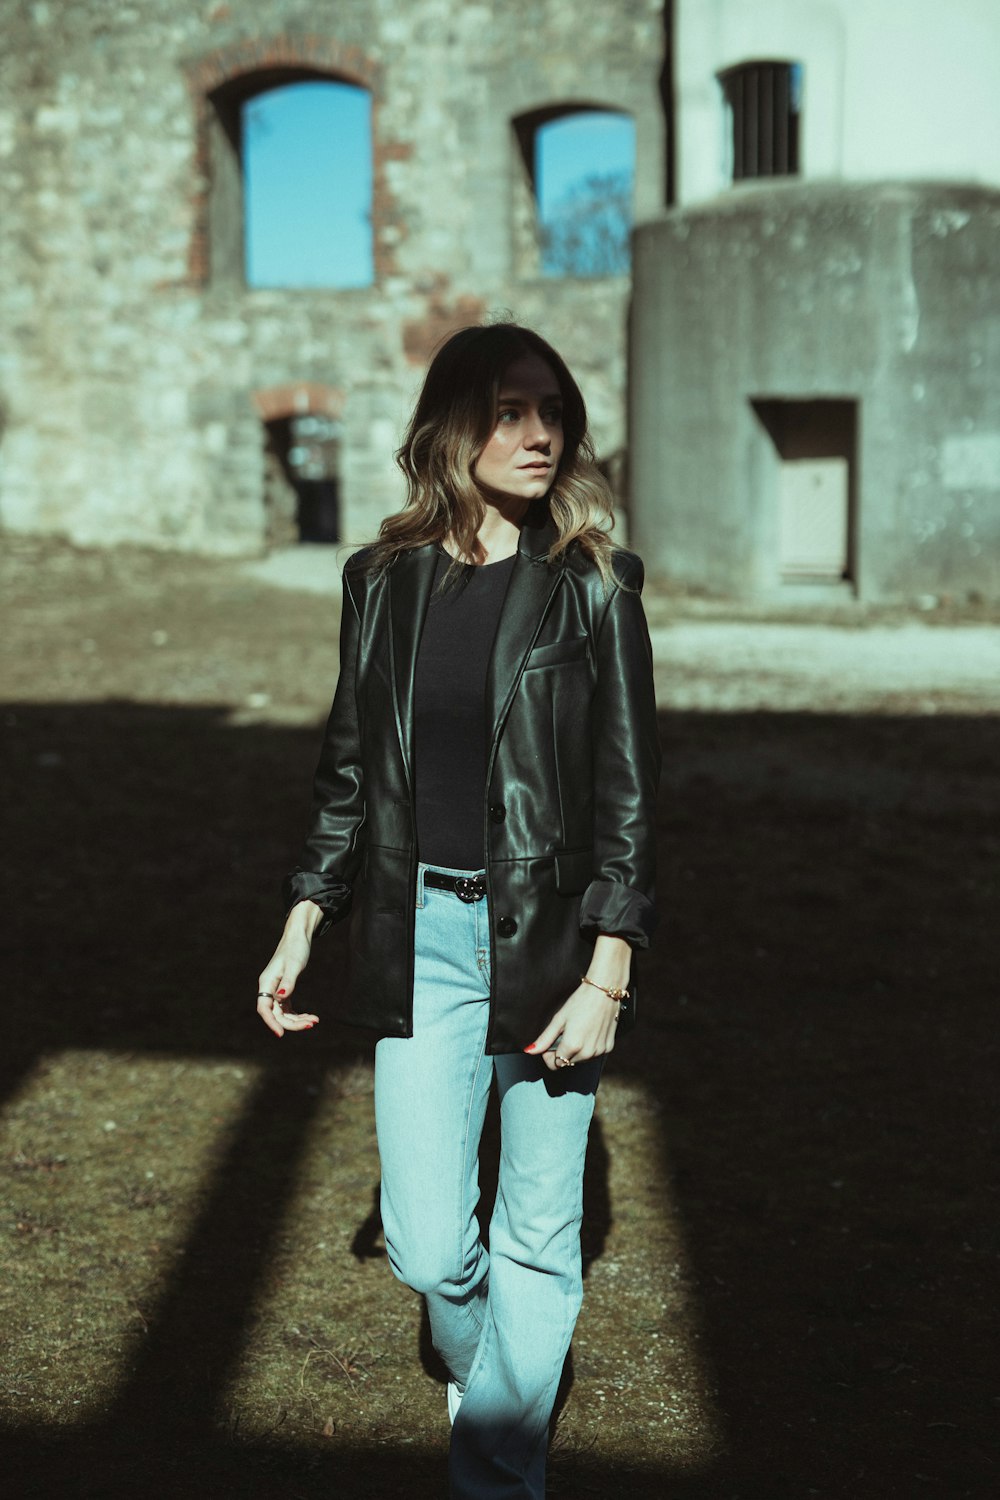 woman in black leather jacket and blue denim jeans standing on gray concrete floor during daytime